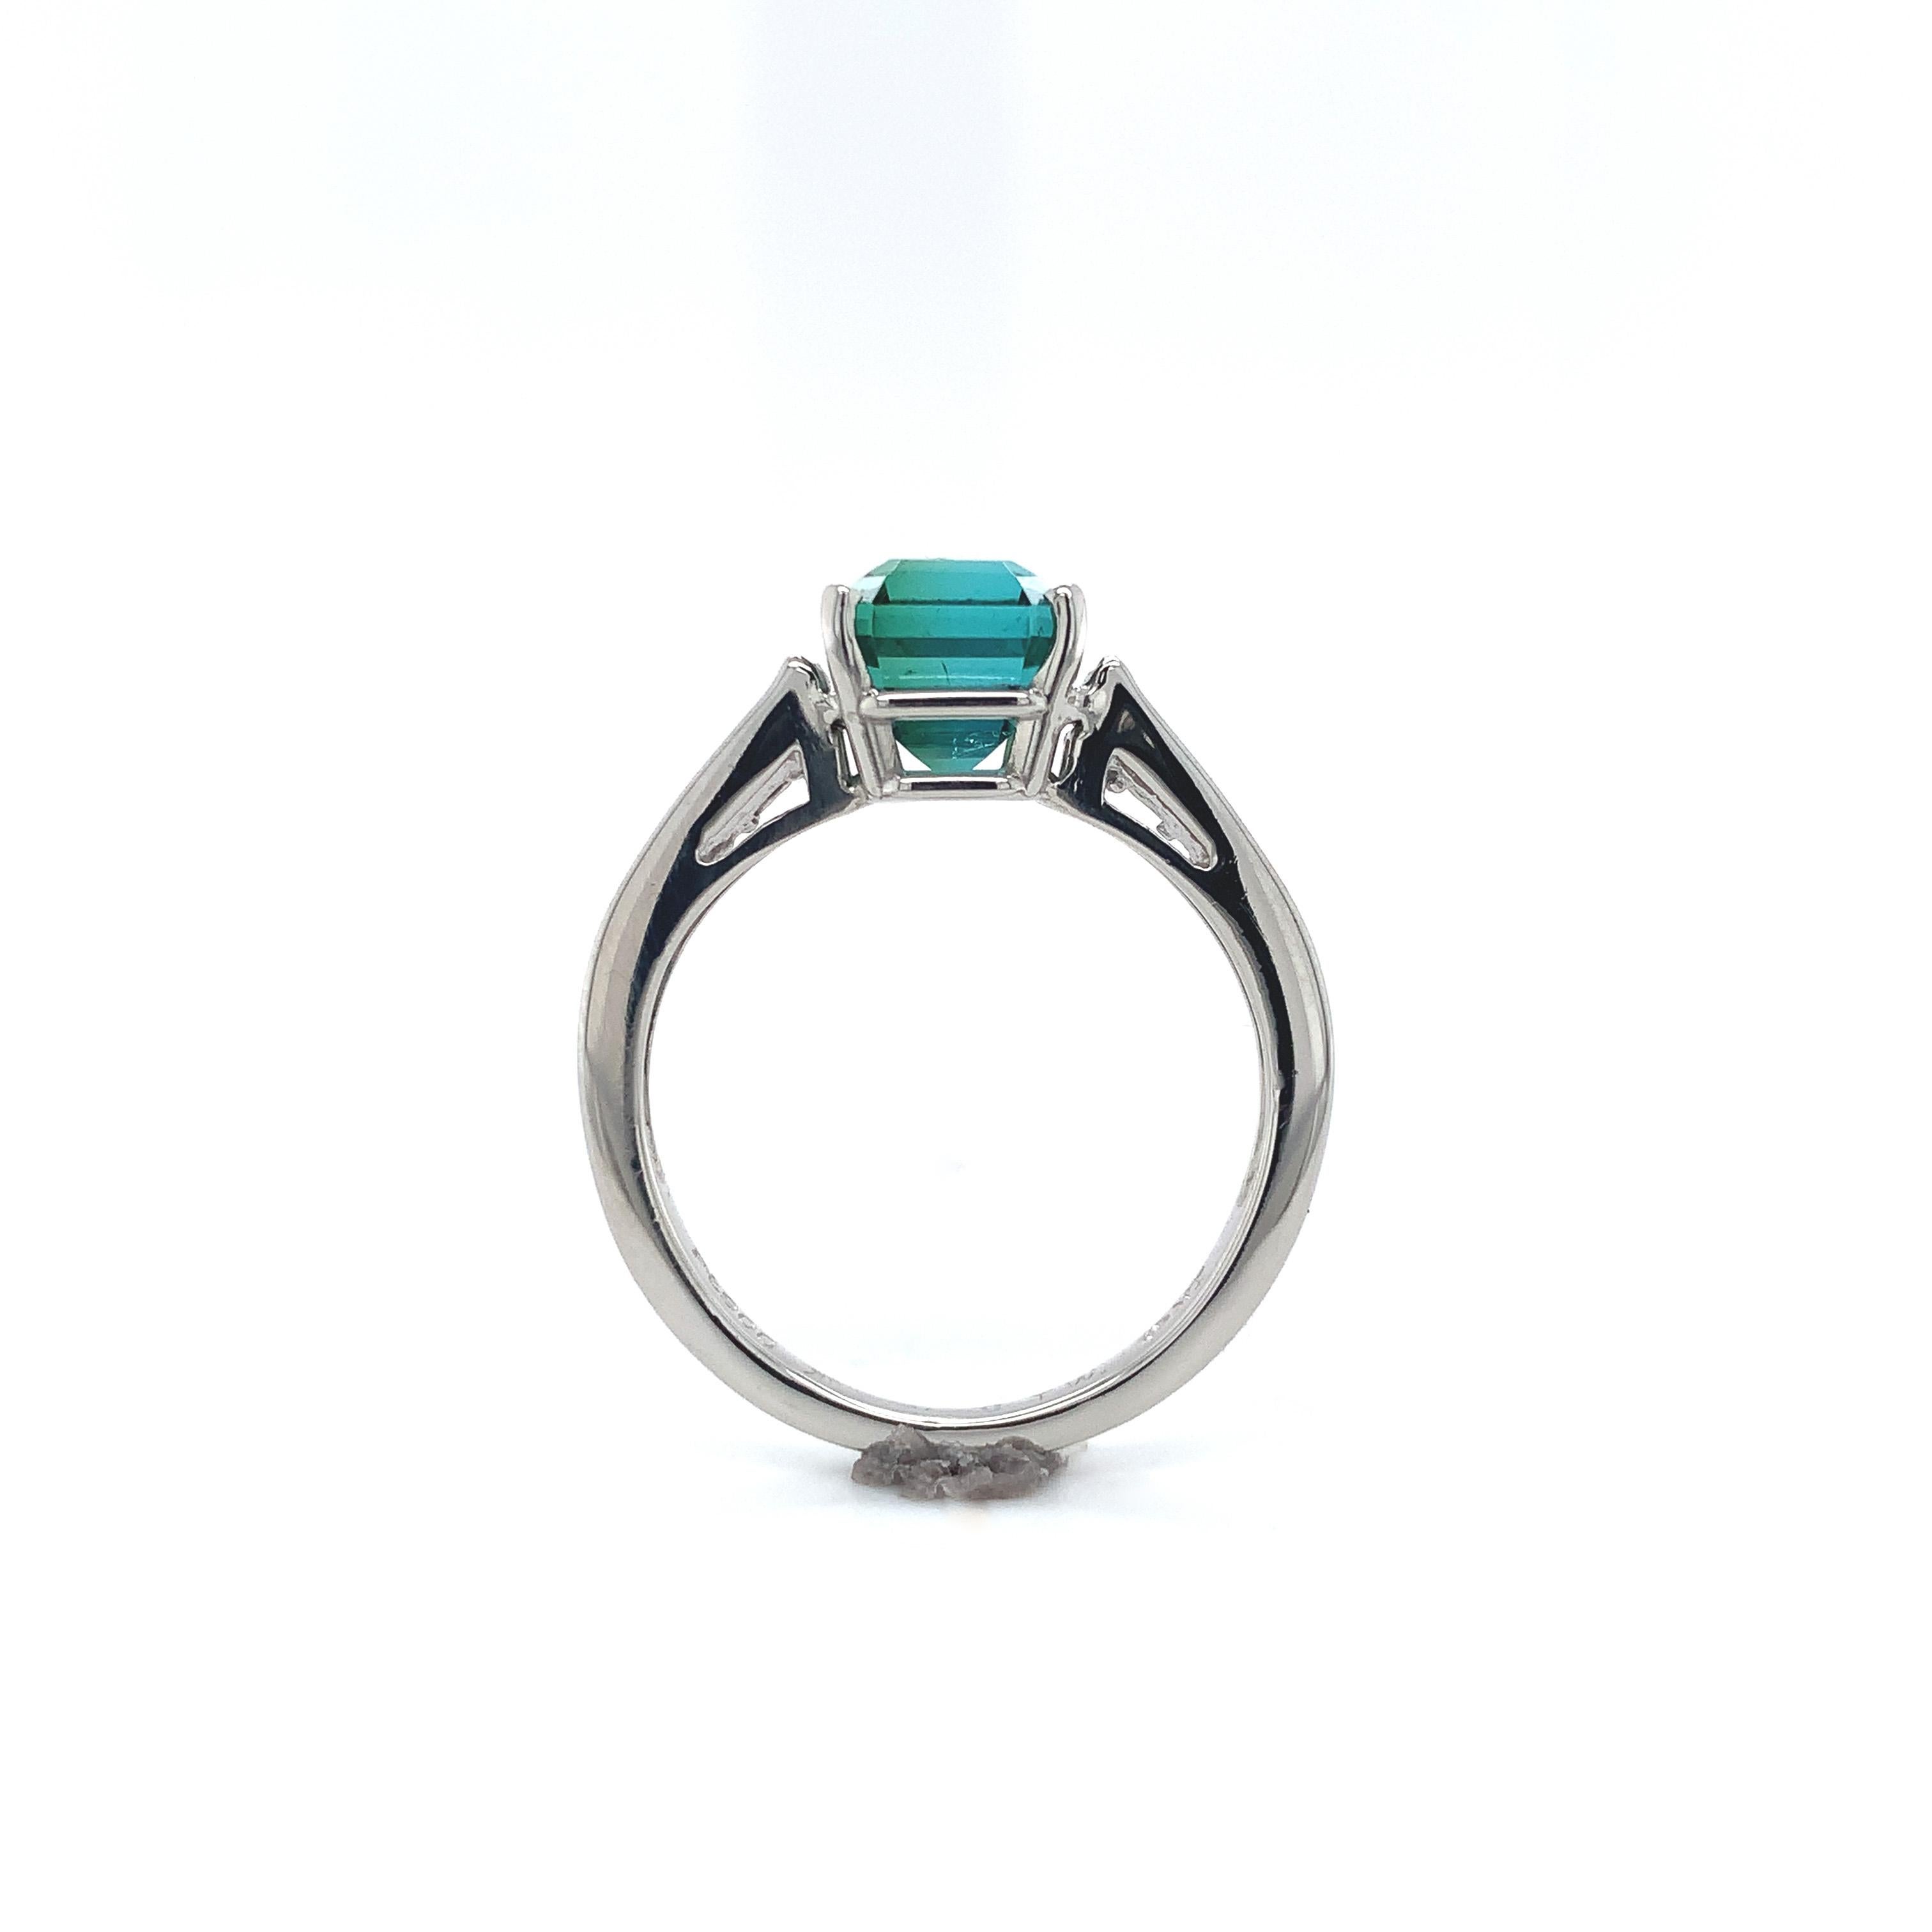 Platinum 2.30 carat green tourmaline ring. The intense chrome green color with slight blue undertones is a fine quality. The tourmaline has an asscher or square step cut measuring about 7mm x 6.7mm. There are 16 diamond baguette accents graduating